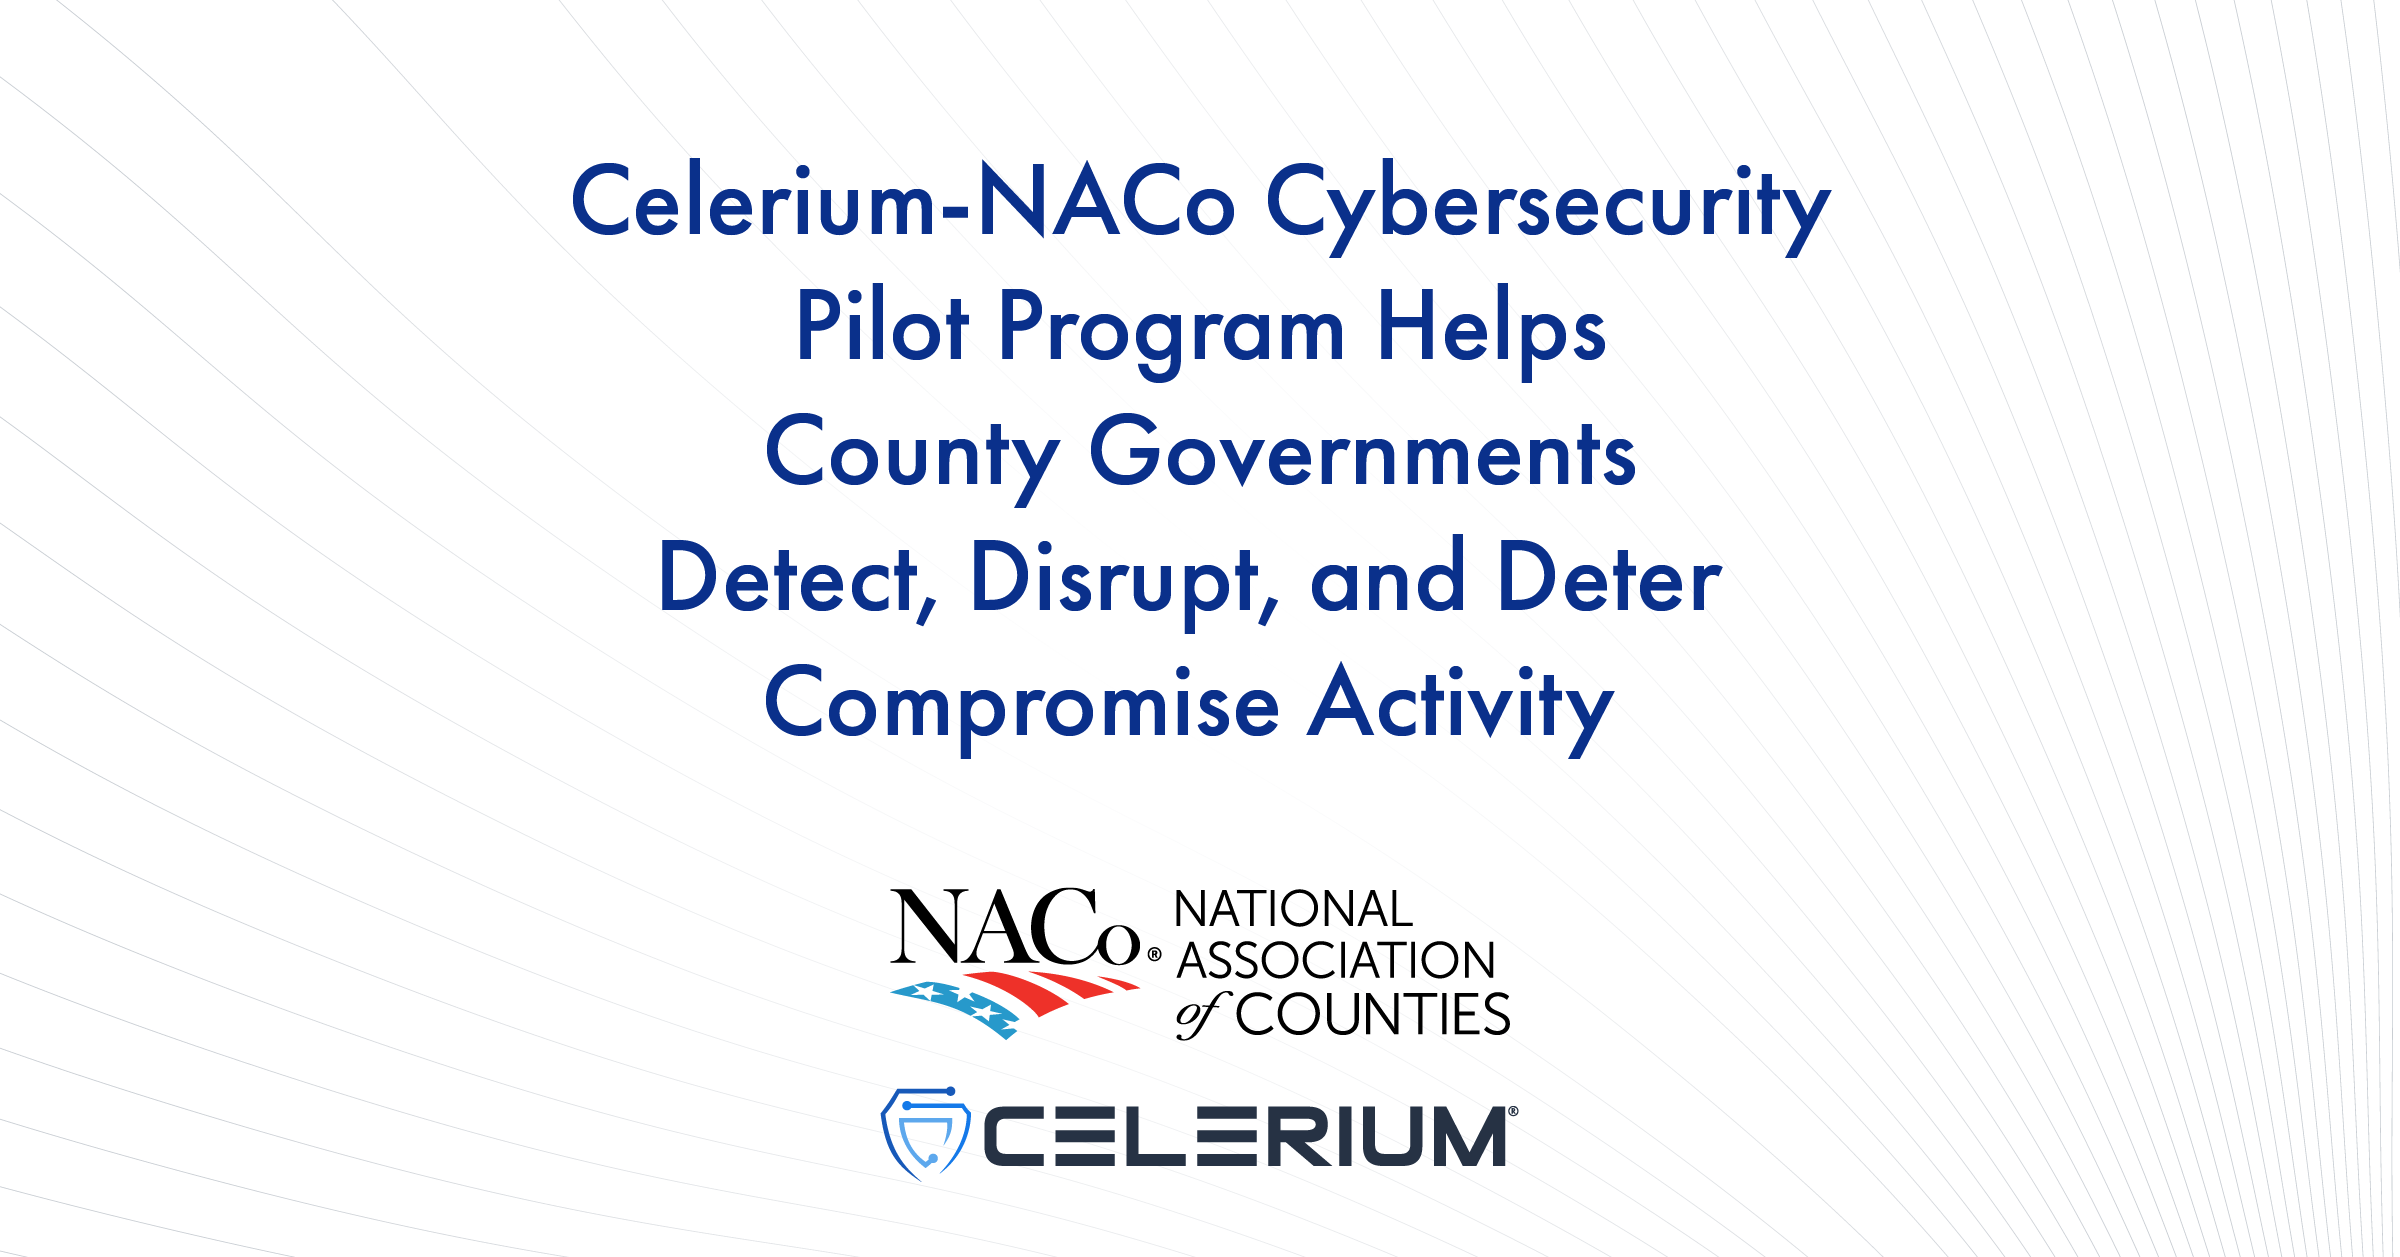 Celerium-NACo Cybersecurity Pilot Program Helps County Governments Detect, Disrupt, and Deter Compromise Activity 